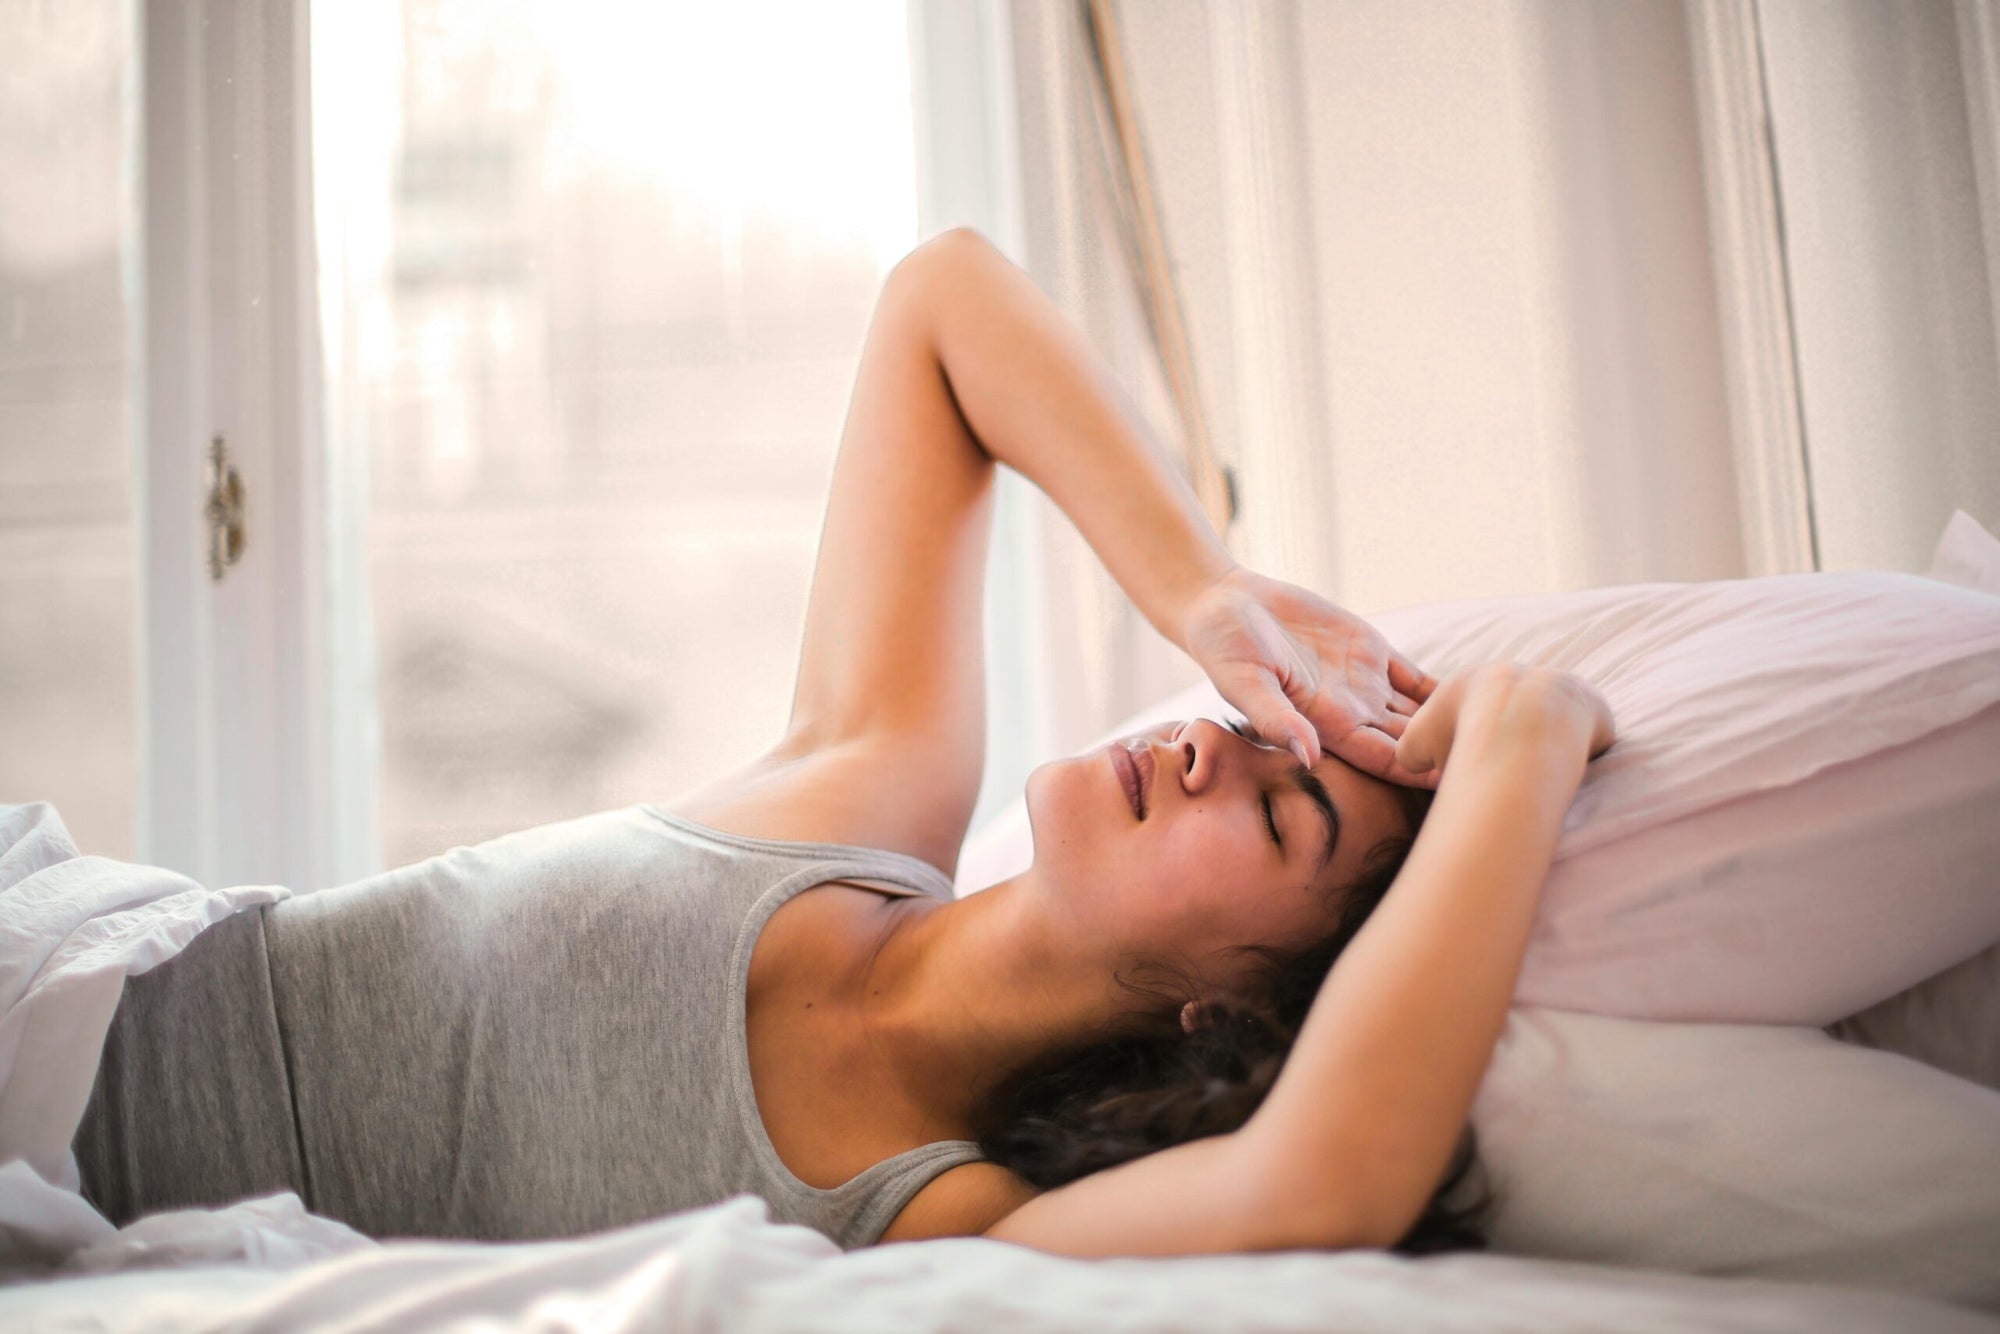 Night Sweats: Causes, Symptoms, and Solutions